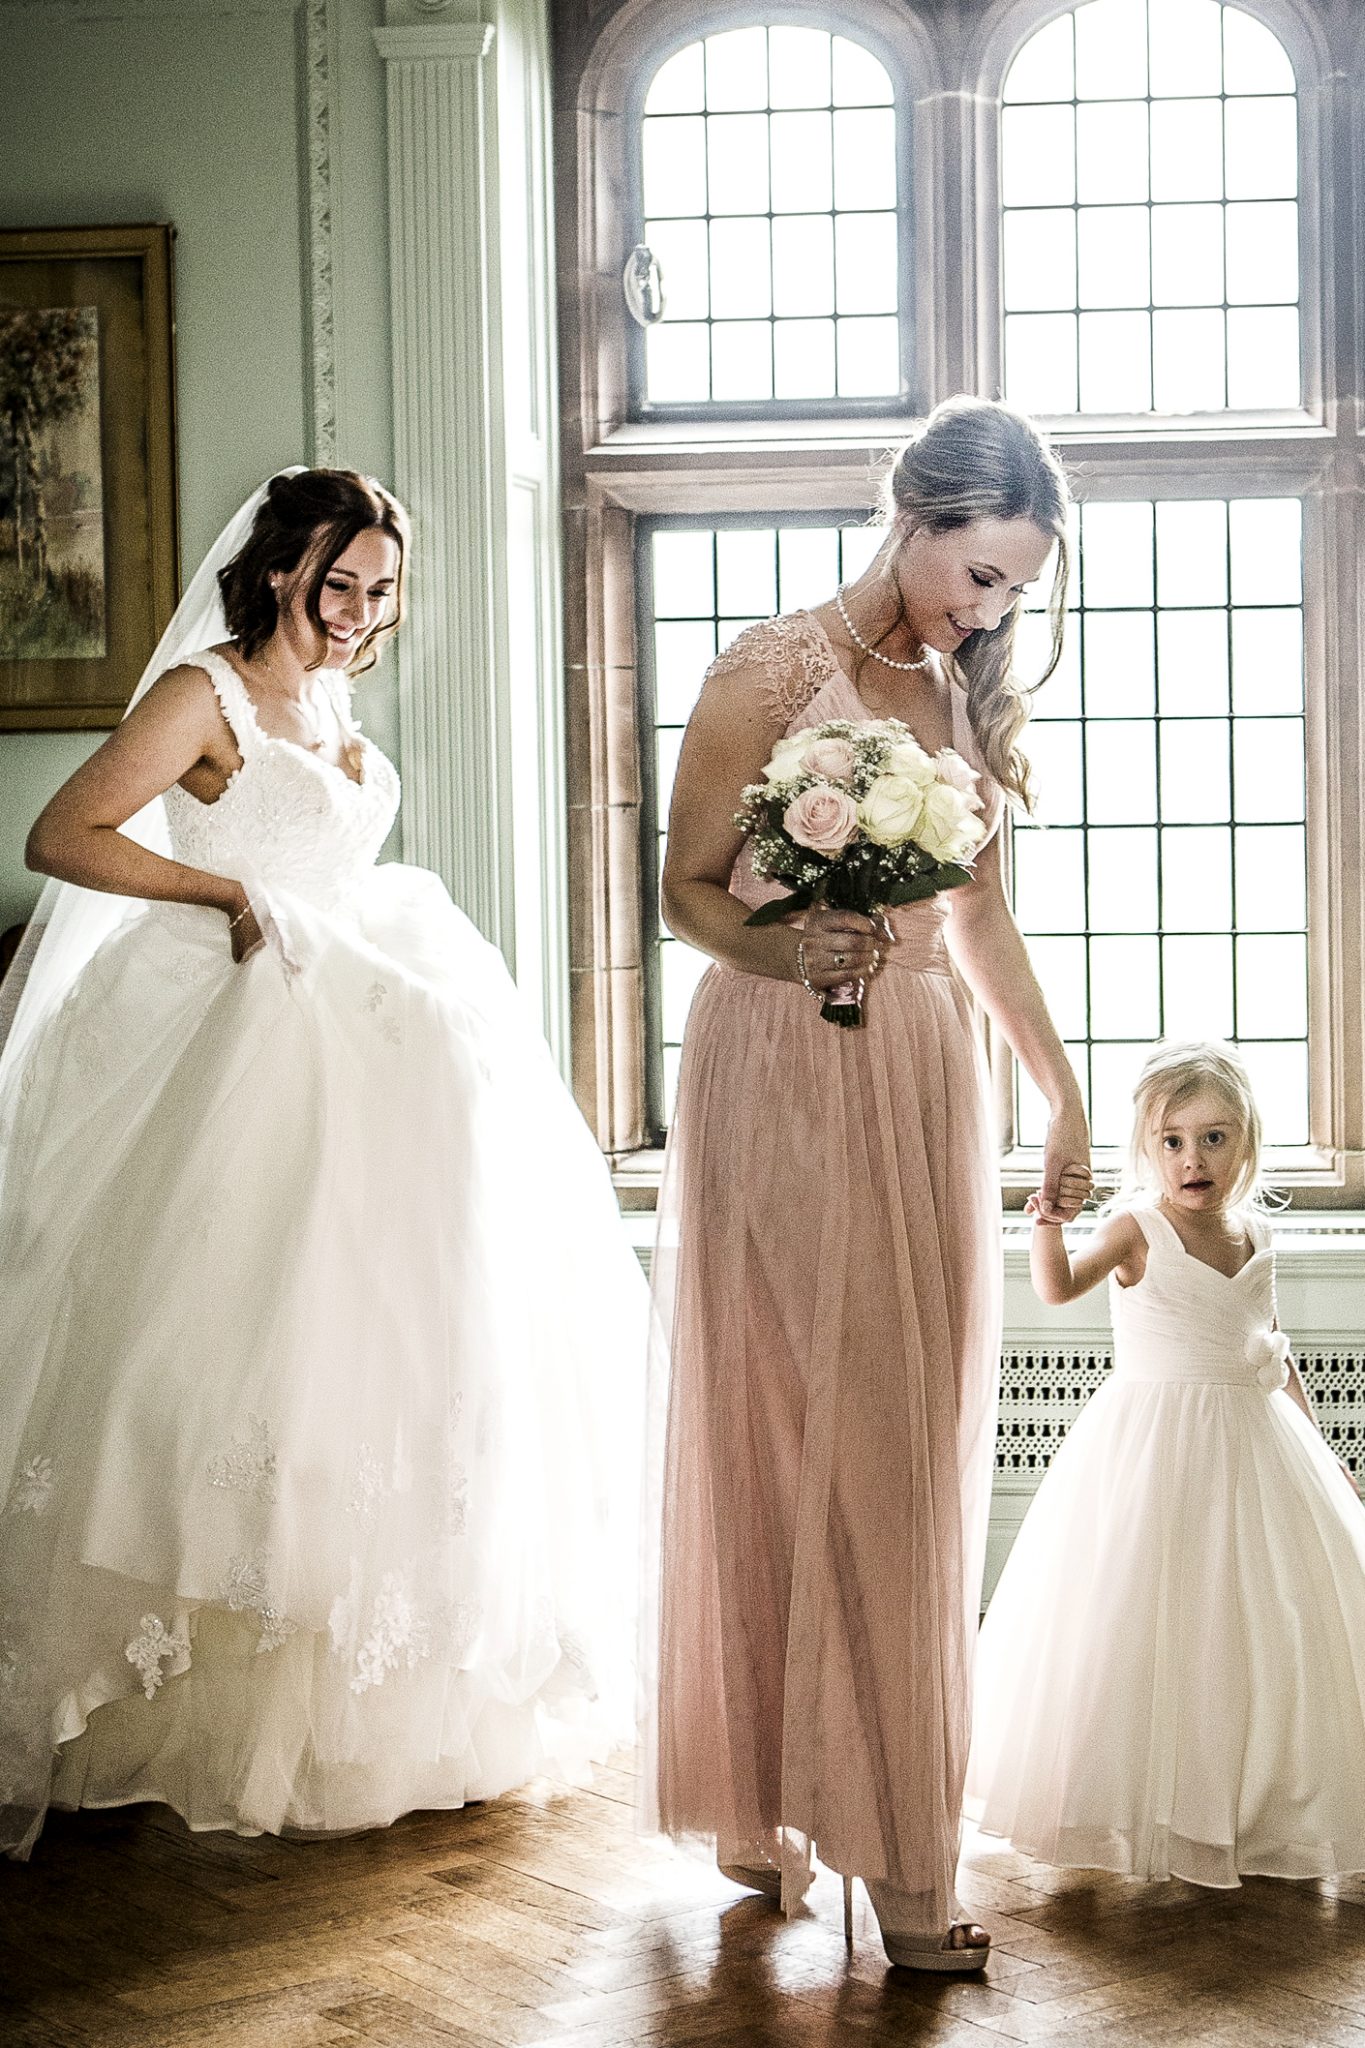 photography-of-the-bride-and-bridesmaids-before-the-wedding-ceremony-at-thornton-manor